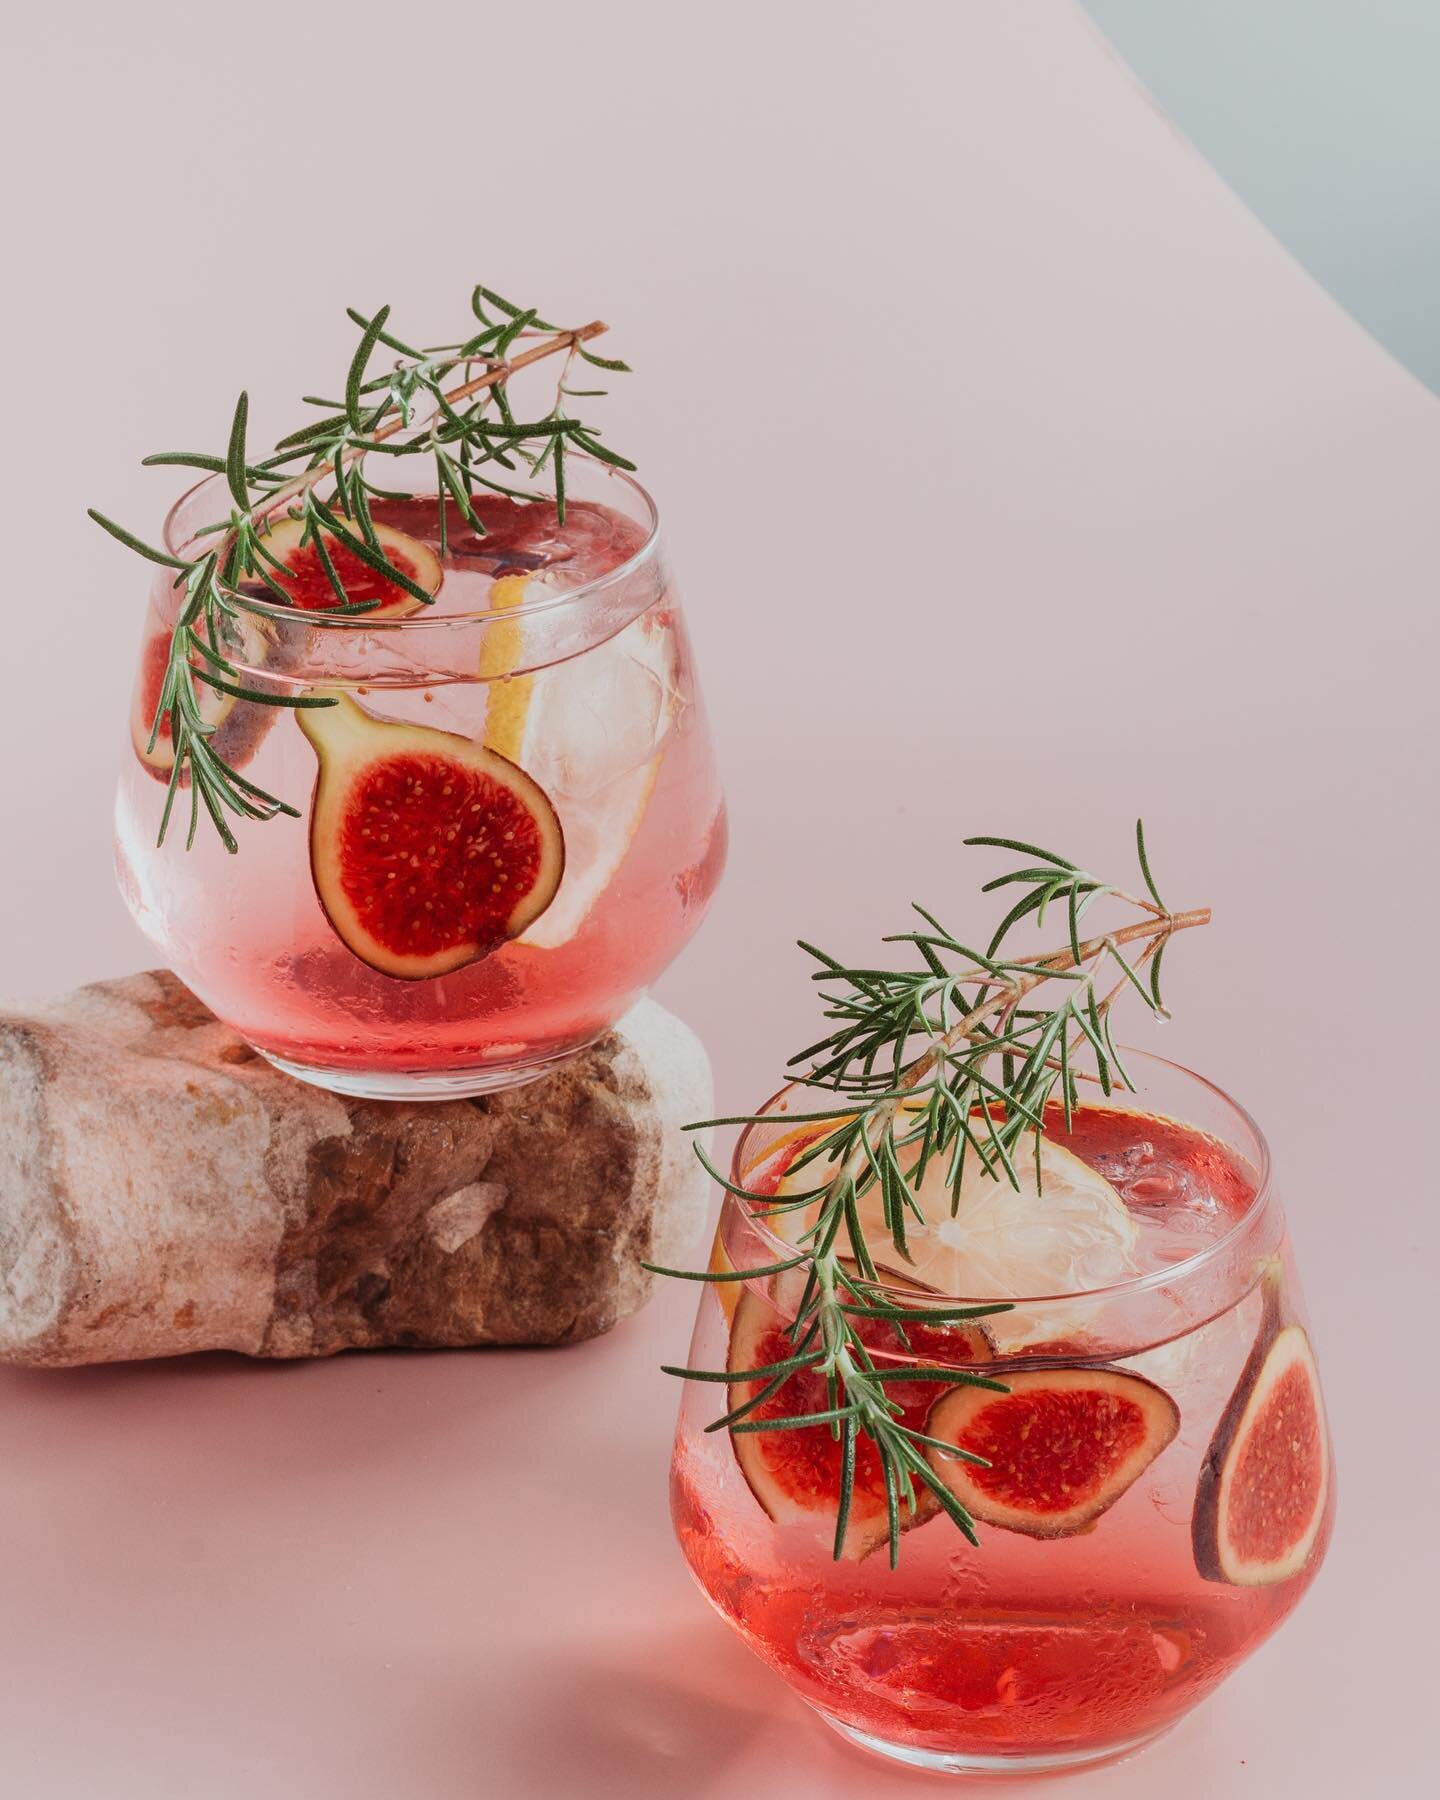 Let&rsquo;s talk signature sips, shall we? 🍸

A perfectly crafted, visually stunning drink is a delicious way to infuse your personality and style into the celebration 🍾 🌺

Plus, who doesn&rsquo;t love a clever pun or witty drink name that perfect